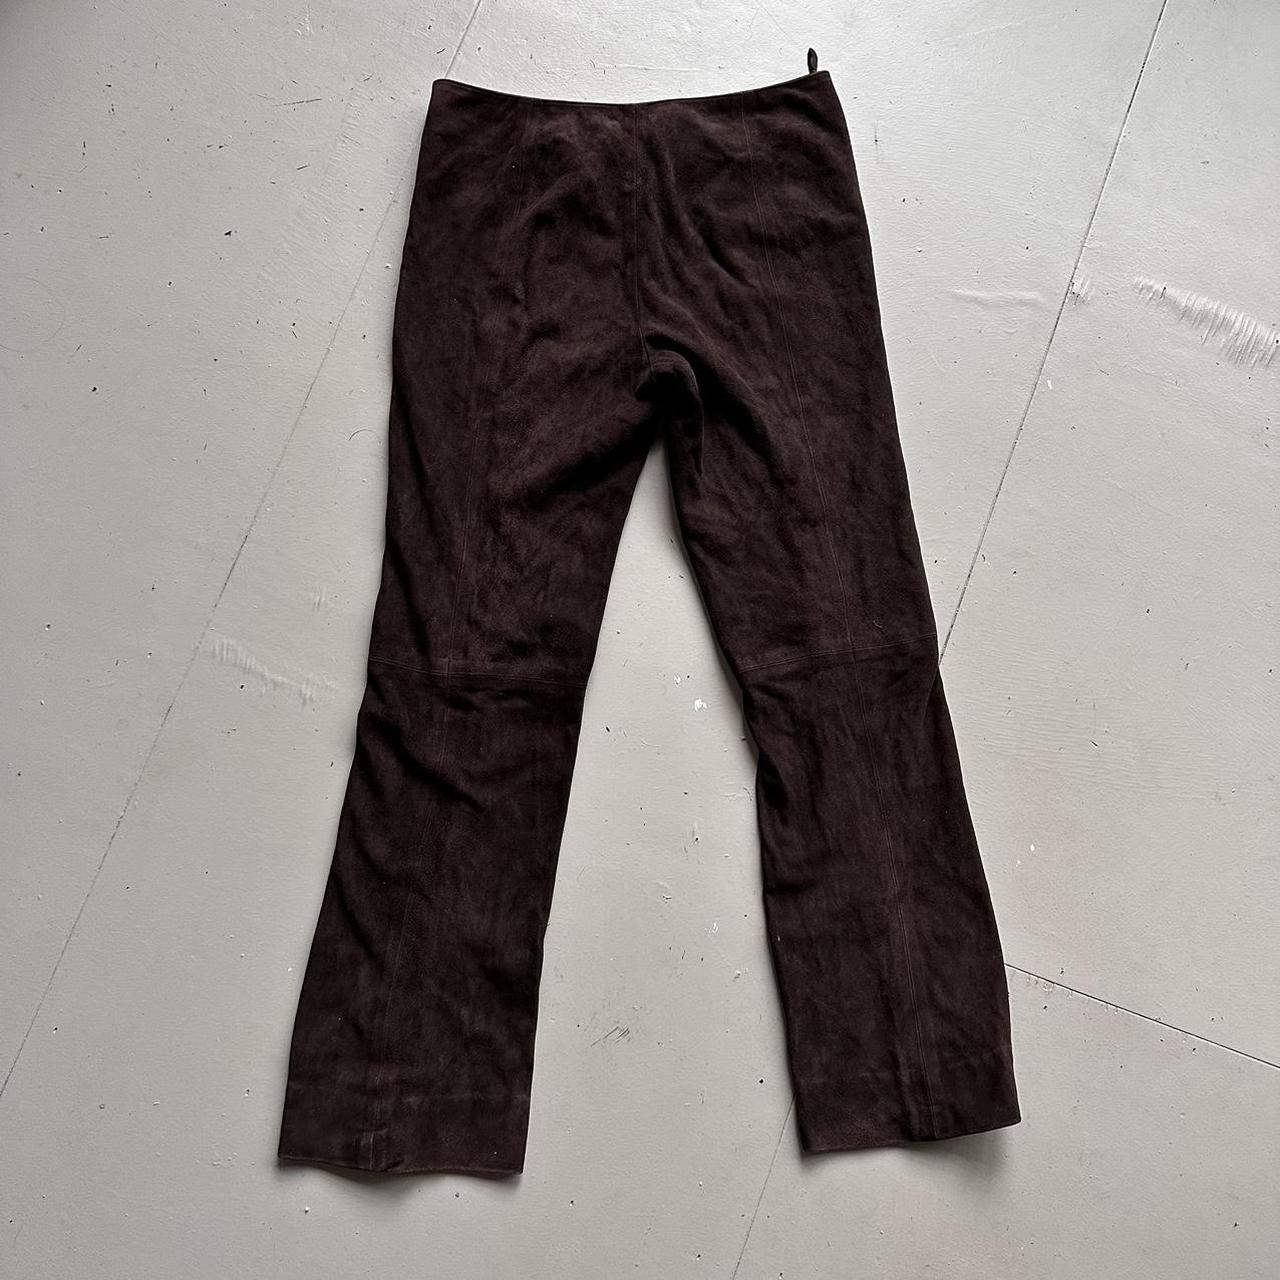 Size small Y2K track pants ⭐️ really nice suede - Depop